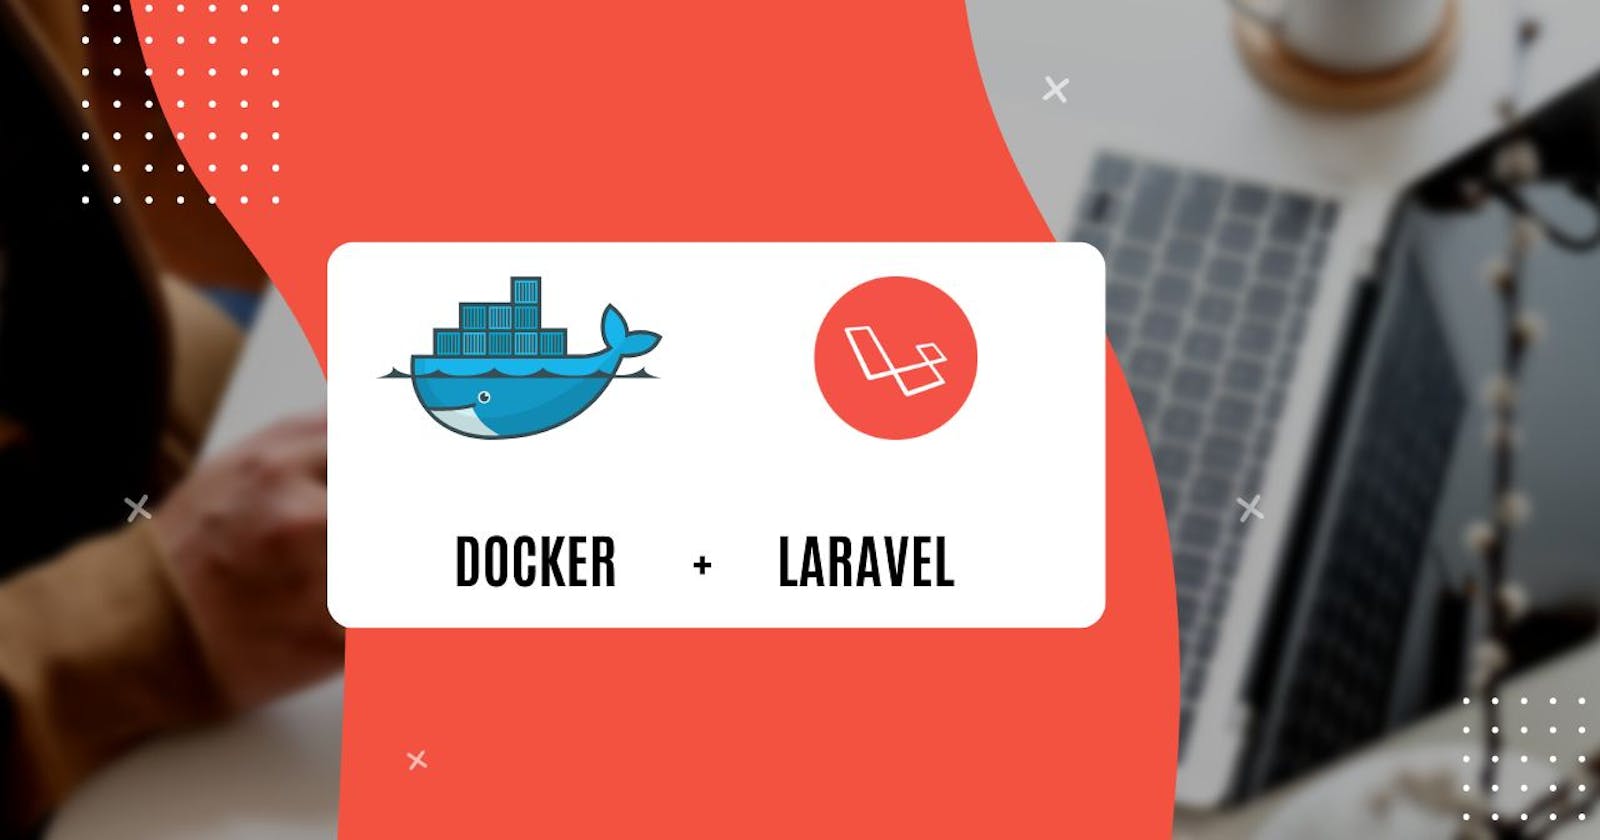 How To Set Up Laravel on Docker, Benefits, and Key Features: Comprehensive Guide